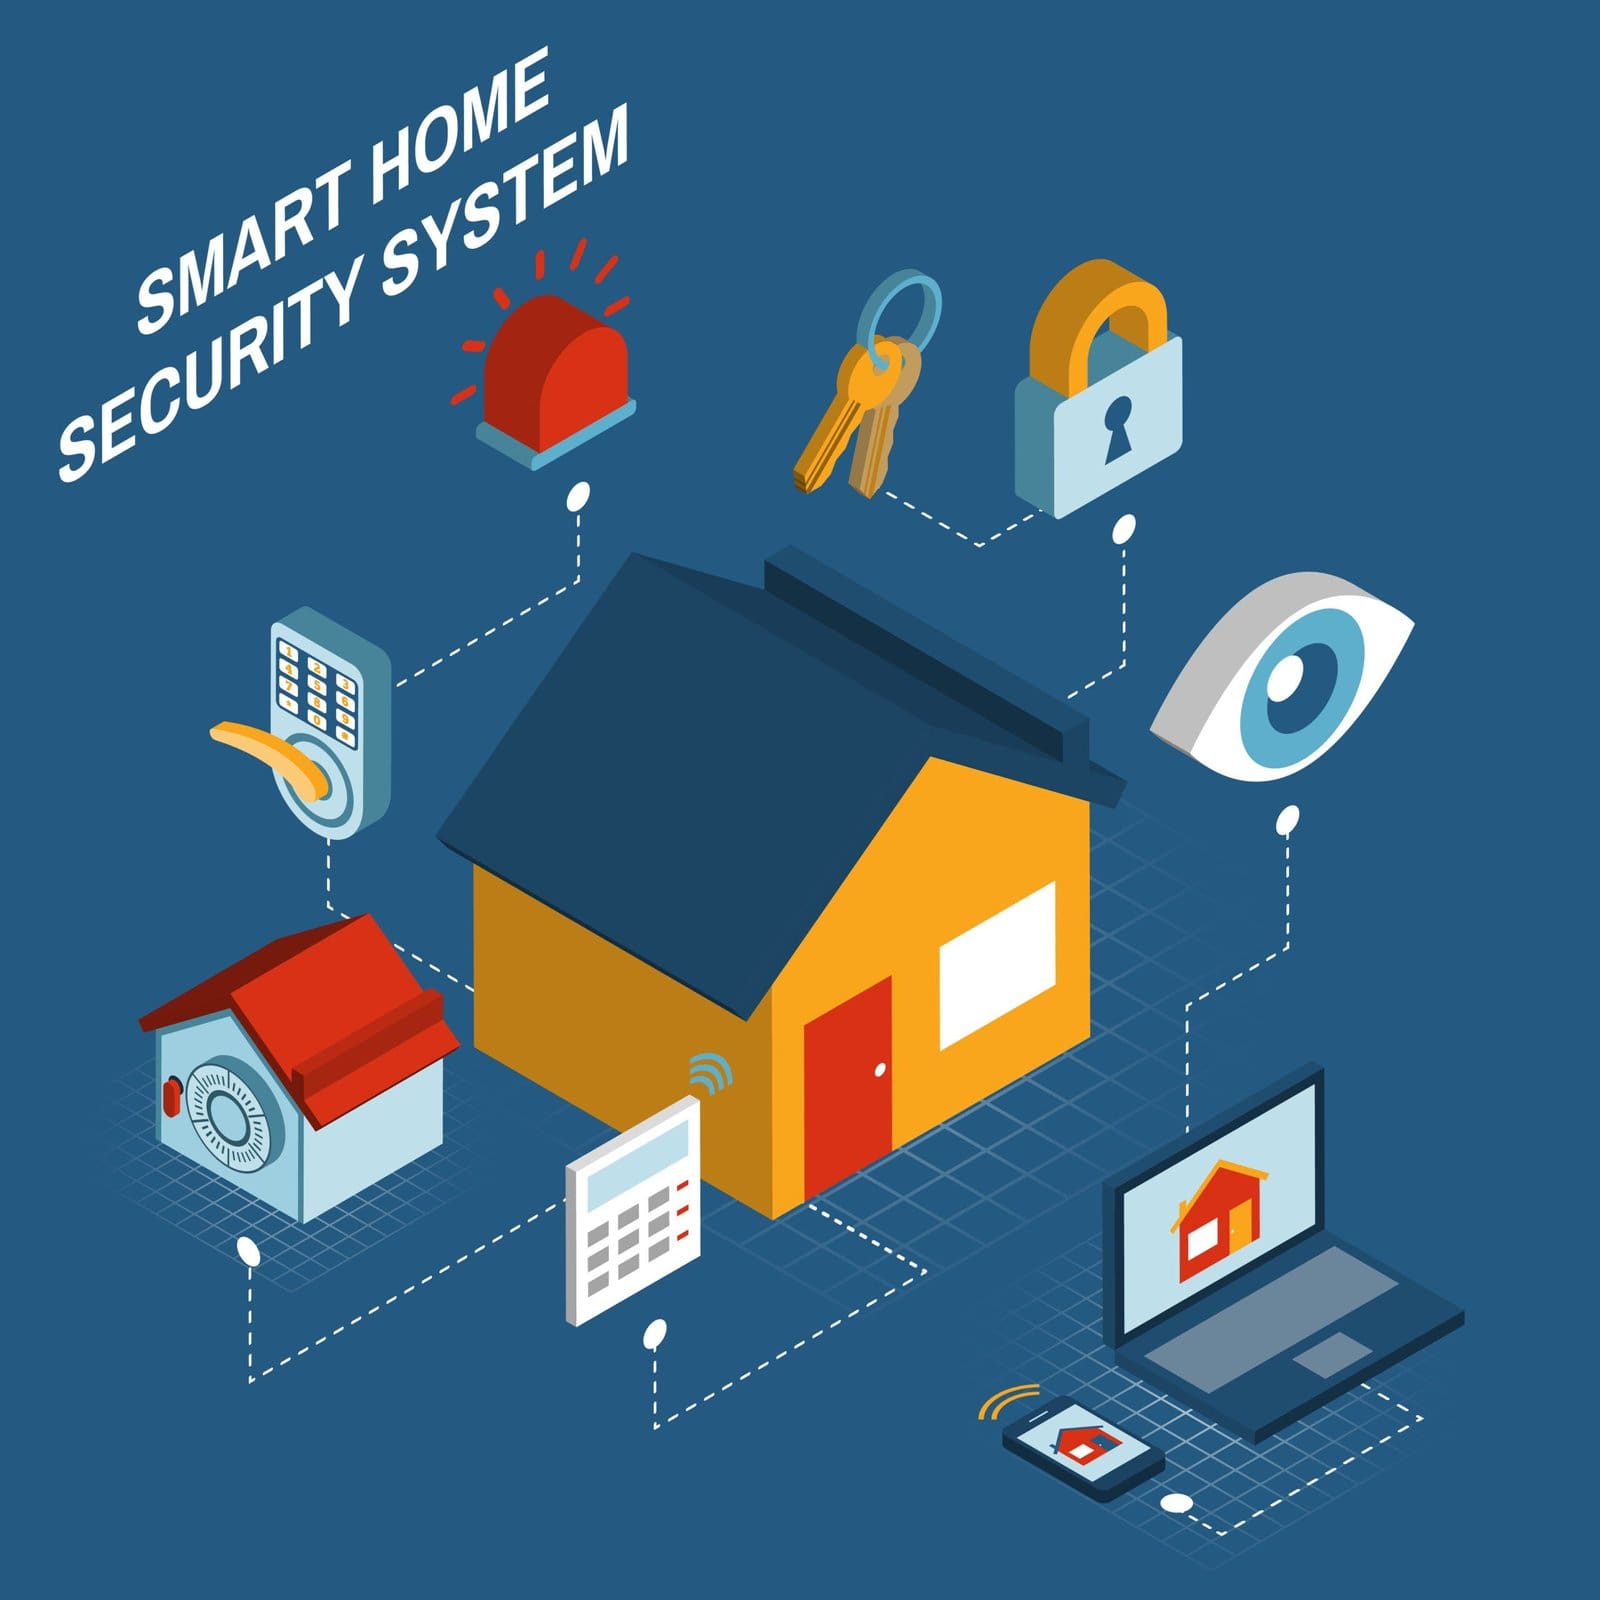 Can I Monitor My Home With Security Cameras Through Home Automation?